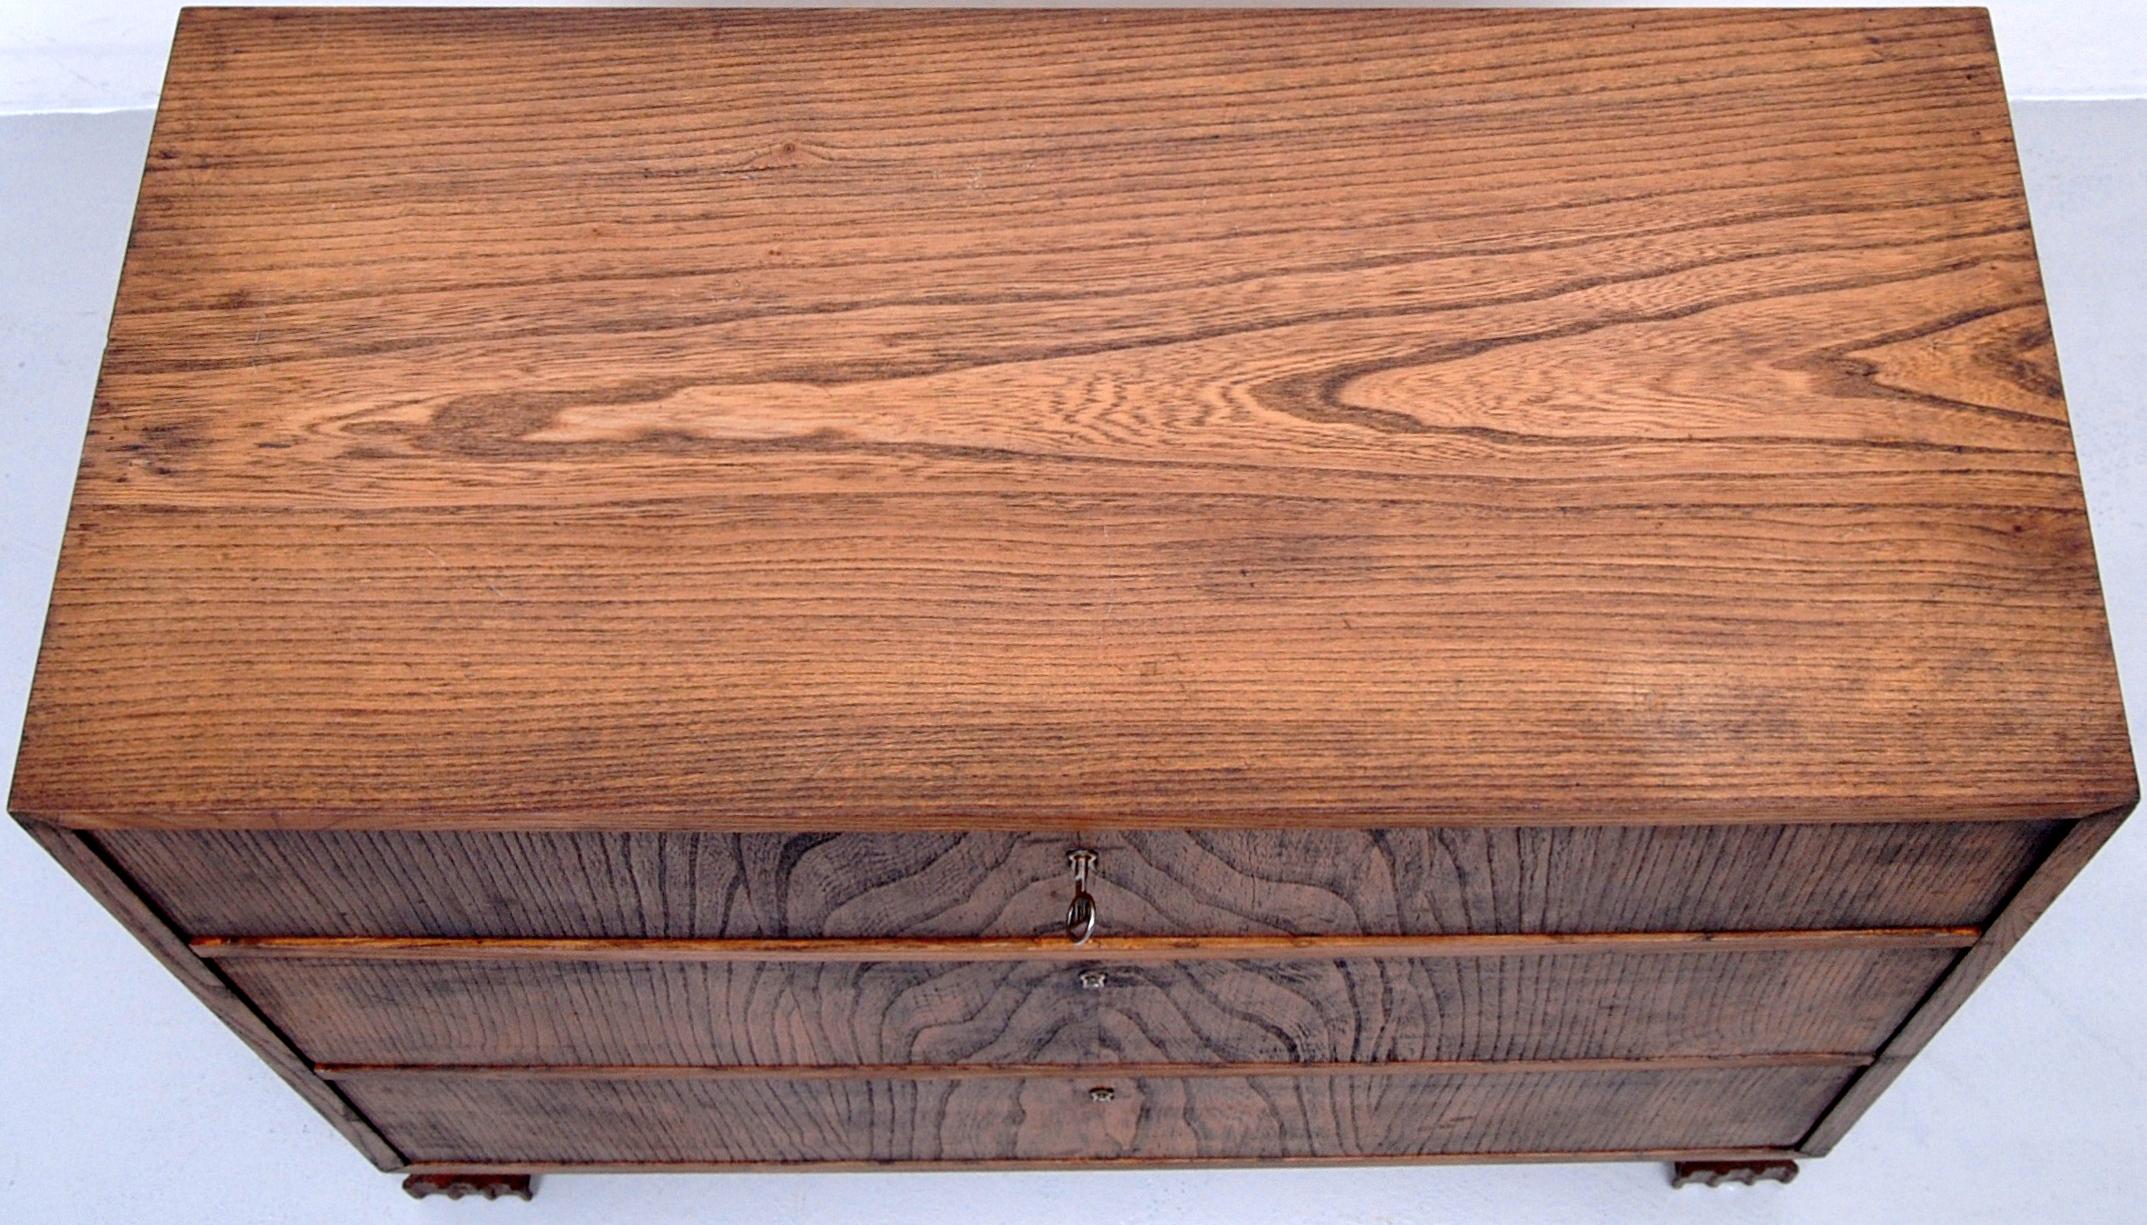 Chest of drawers in the Style of Axel Einar Hjorth, 1940s (Buchenholz)